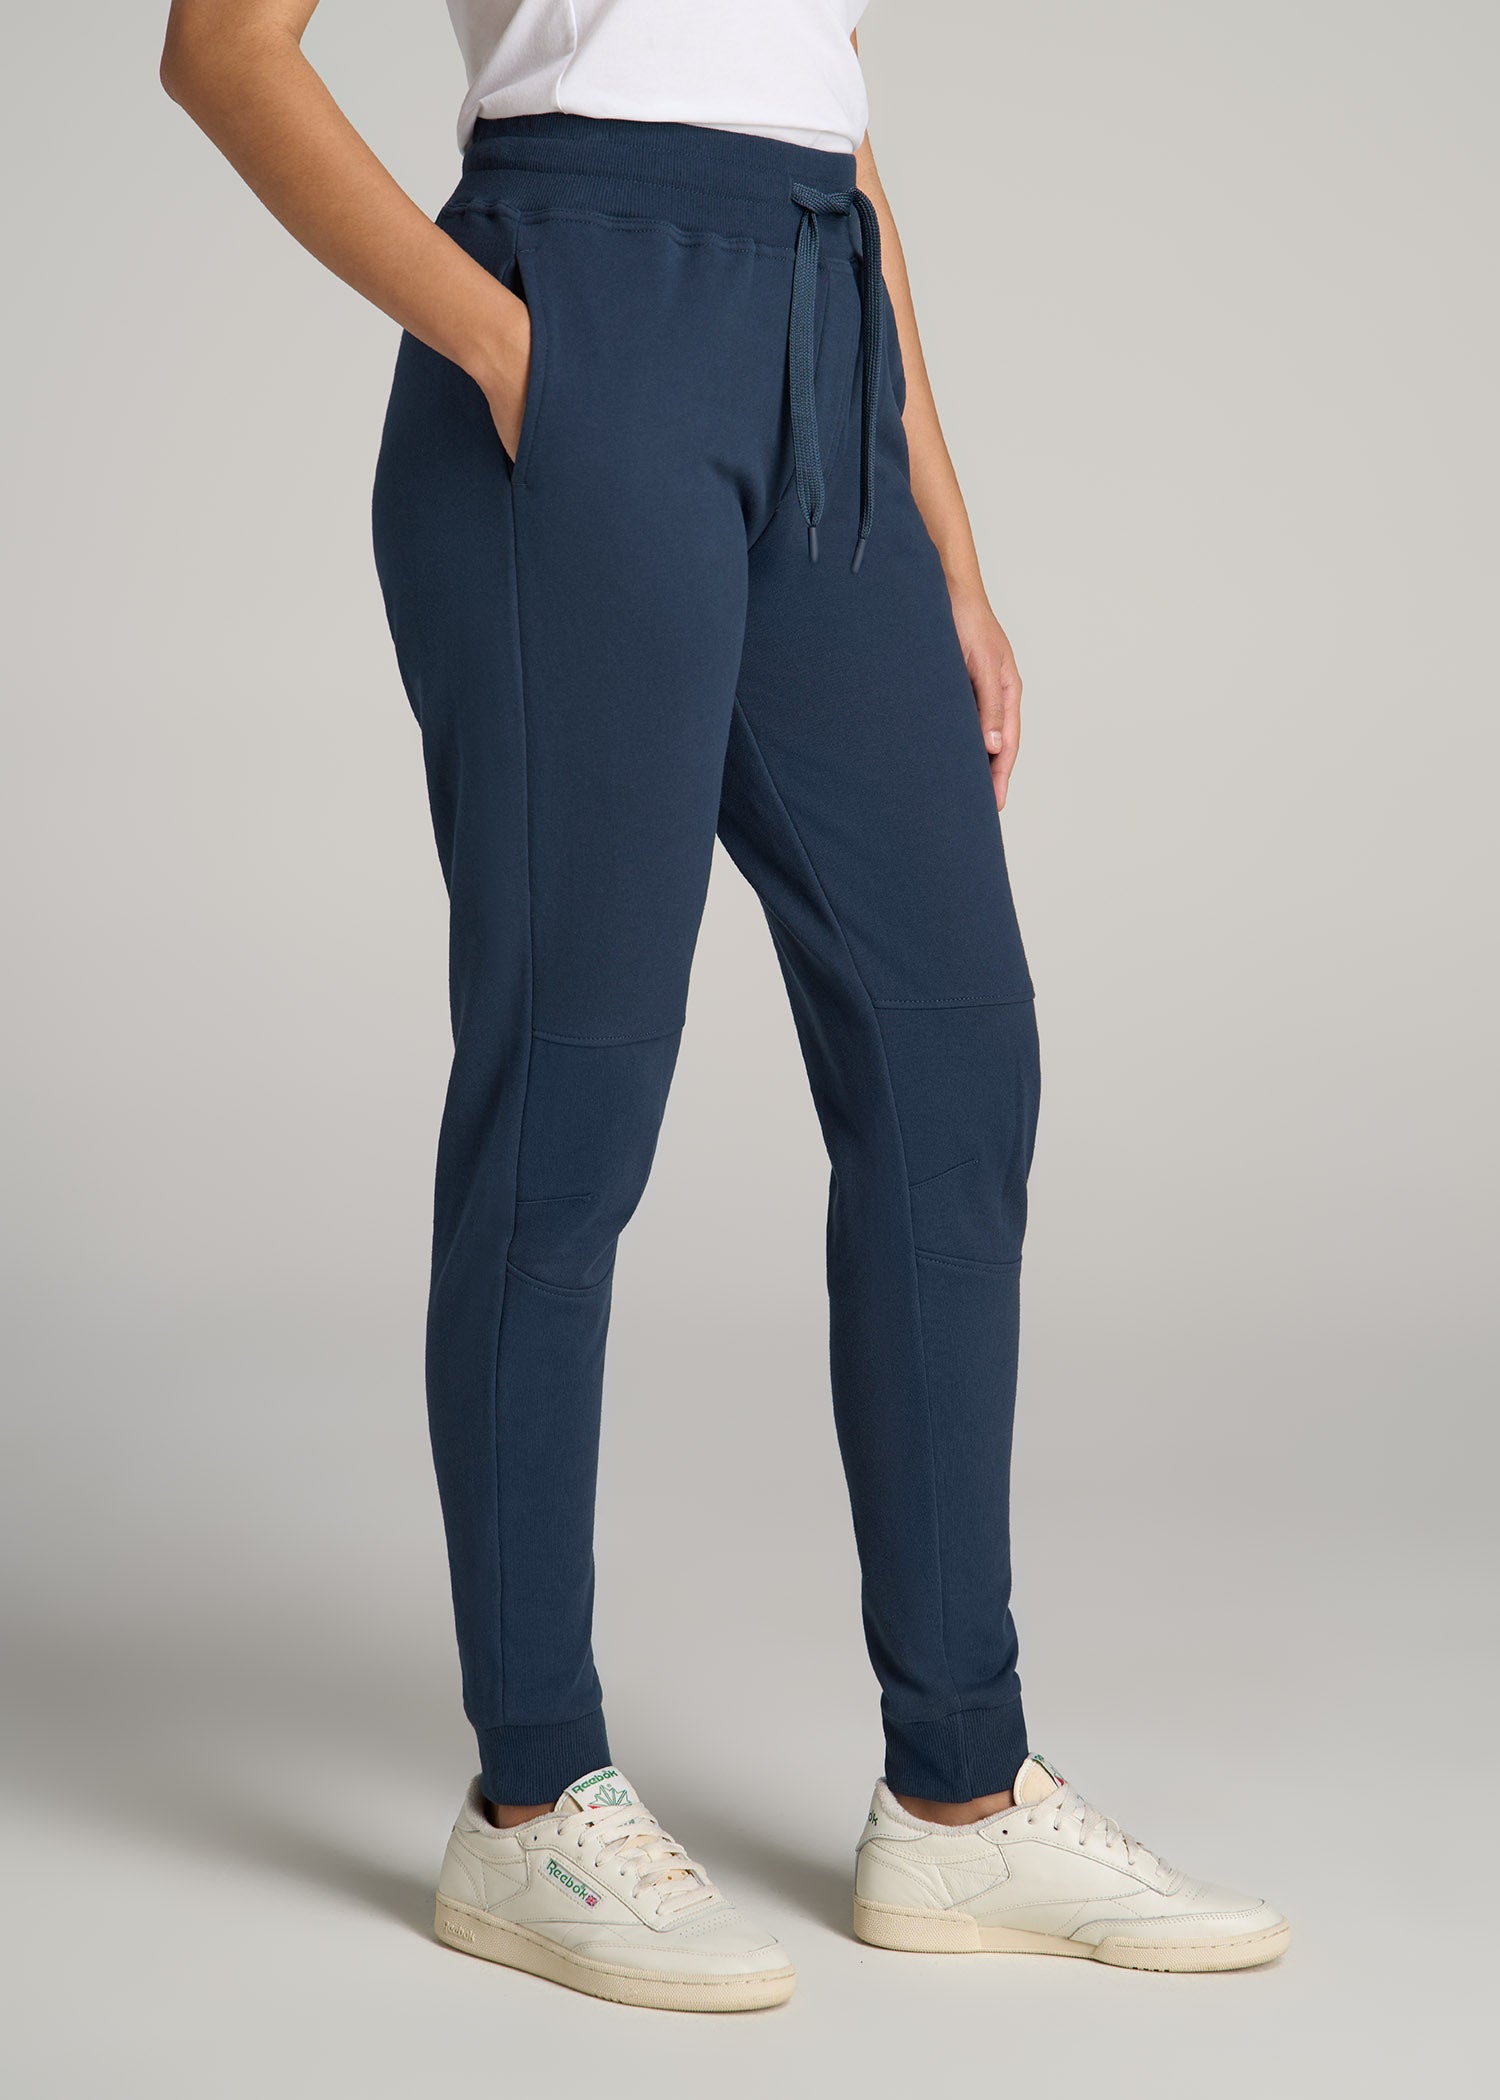 Navy Joggers For Women